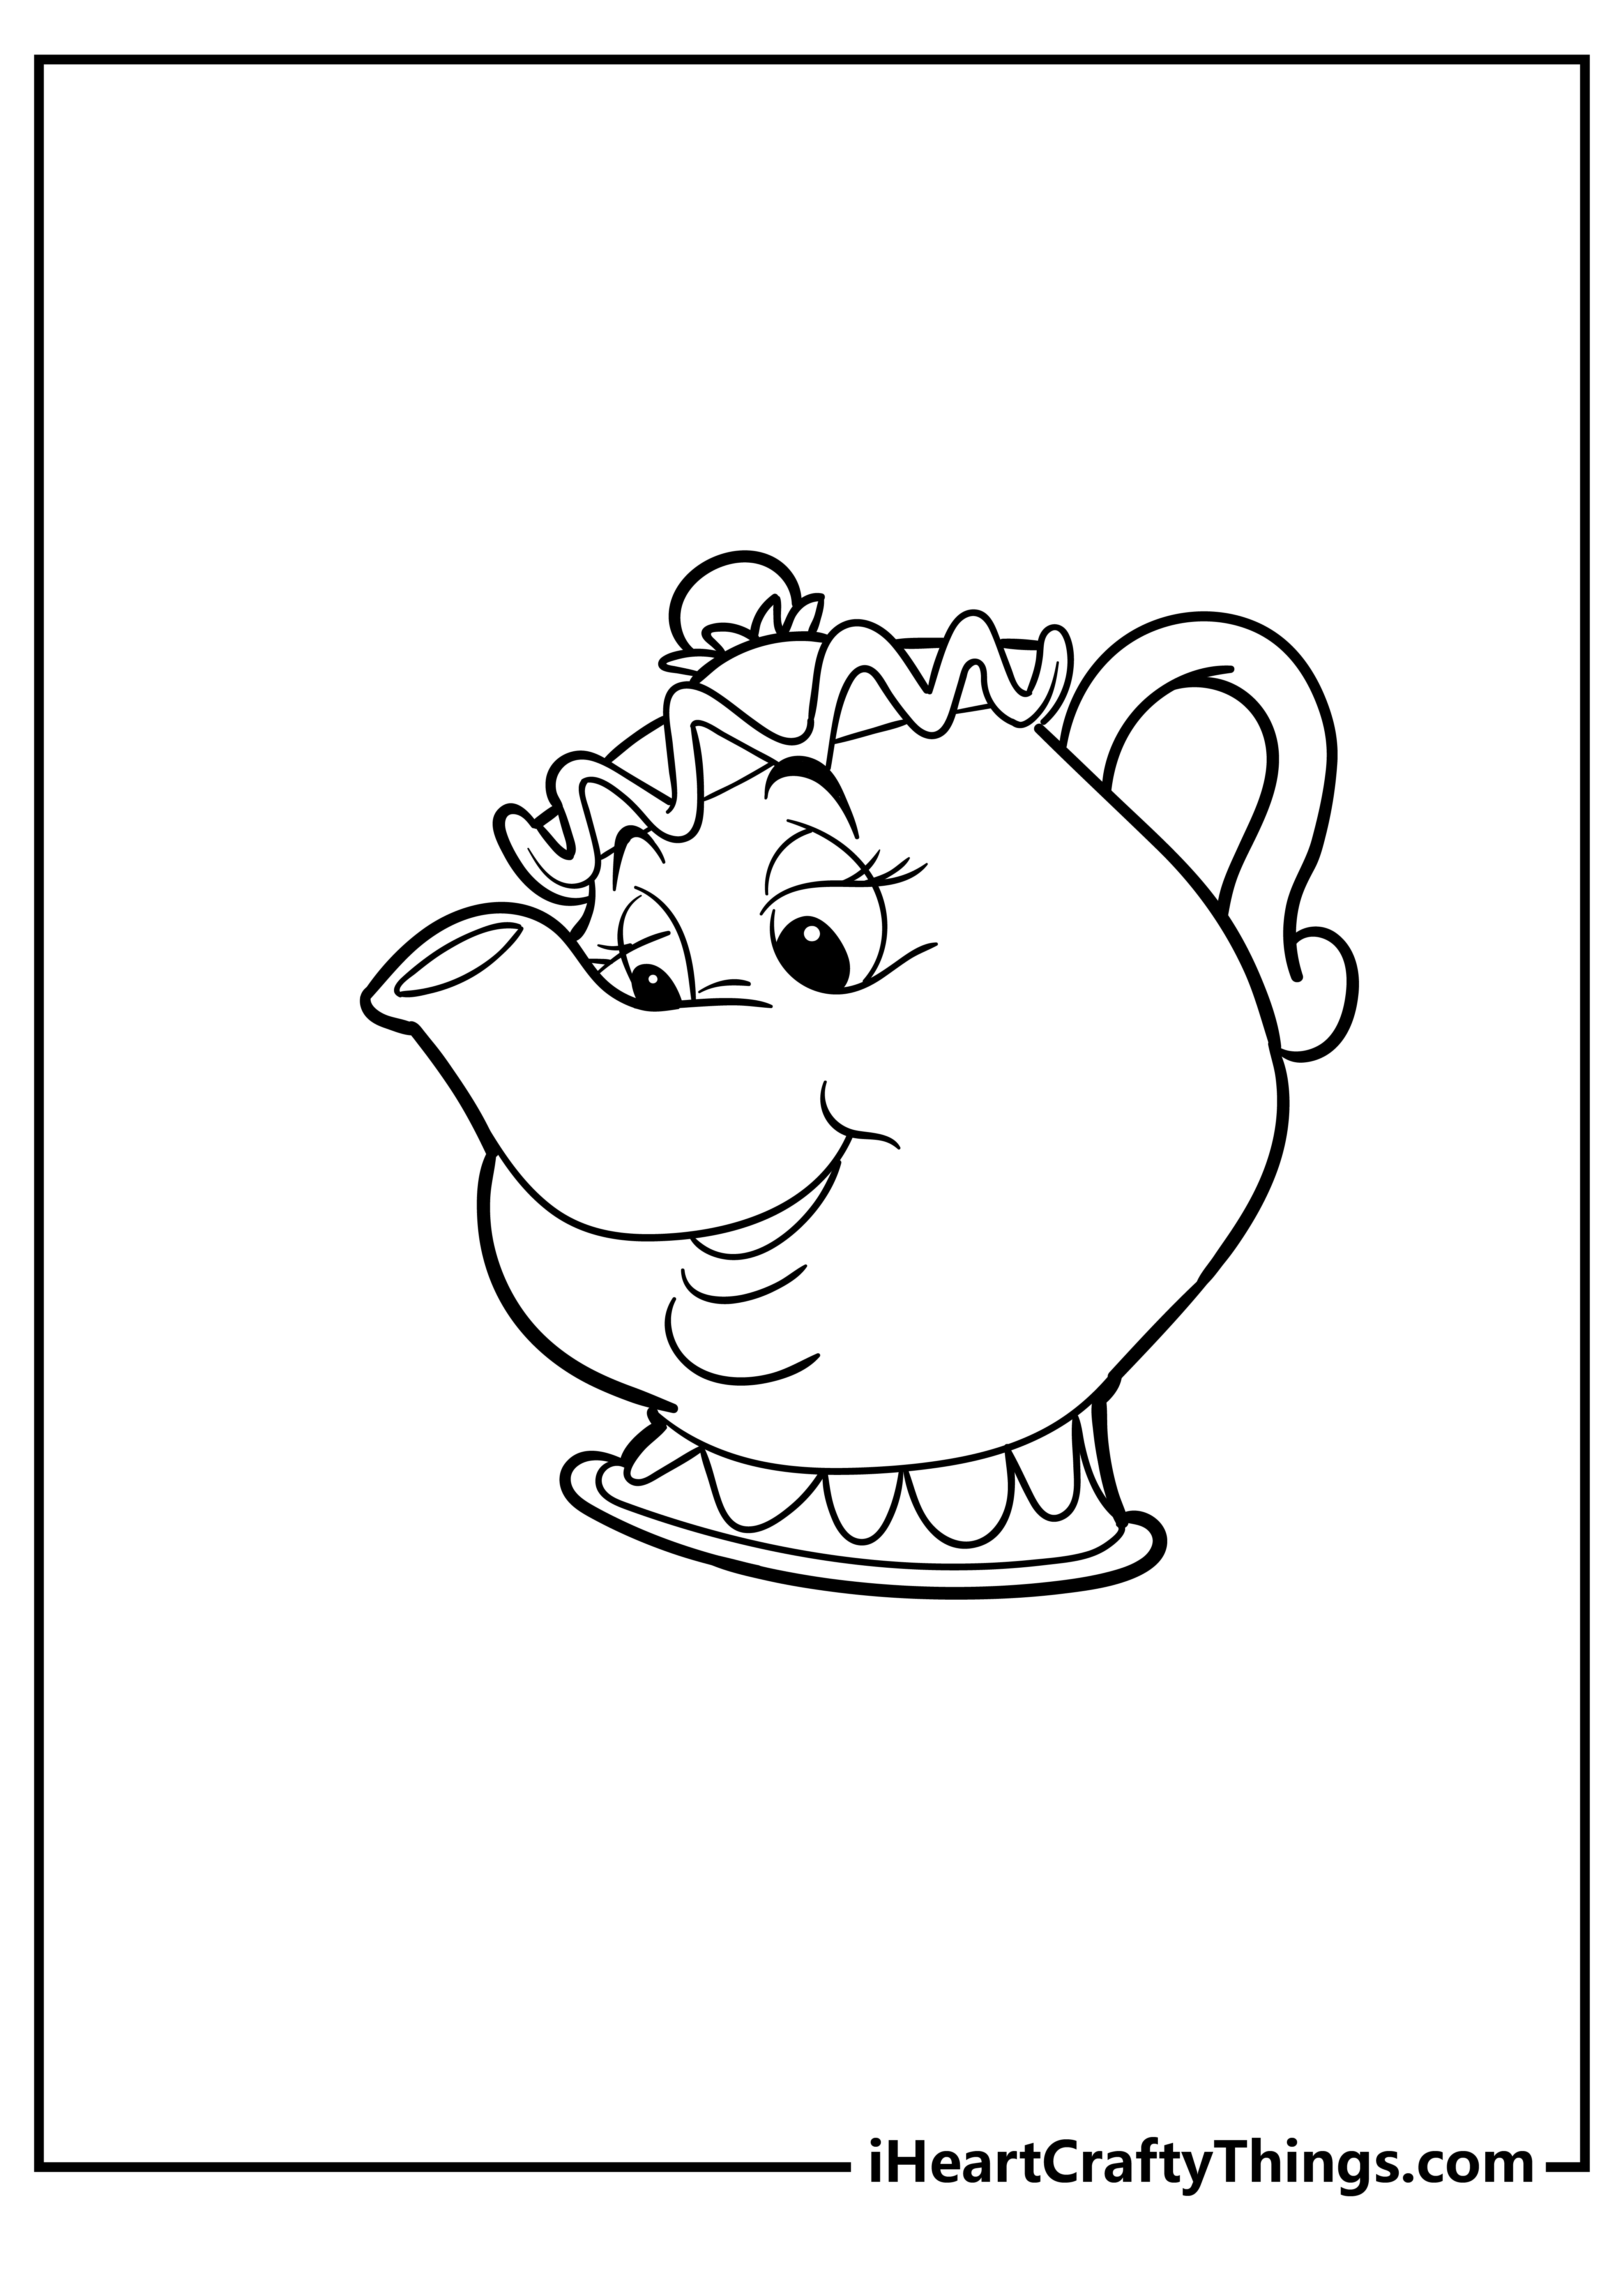 Beauty and the Beast Coloring Pages for adults free printable